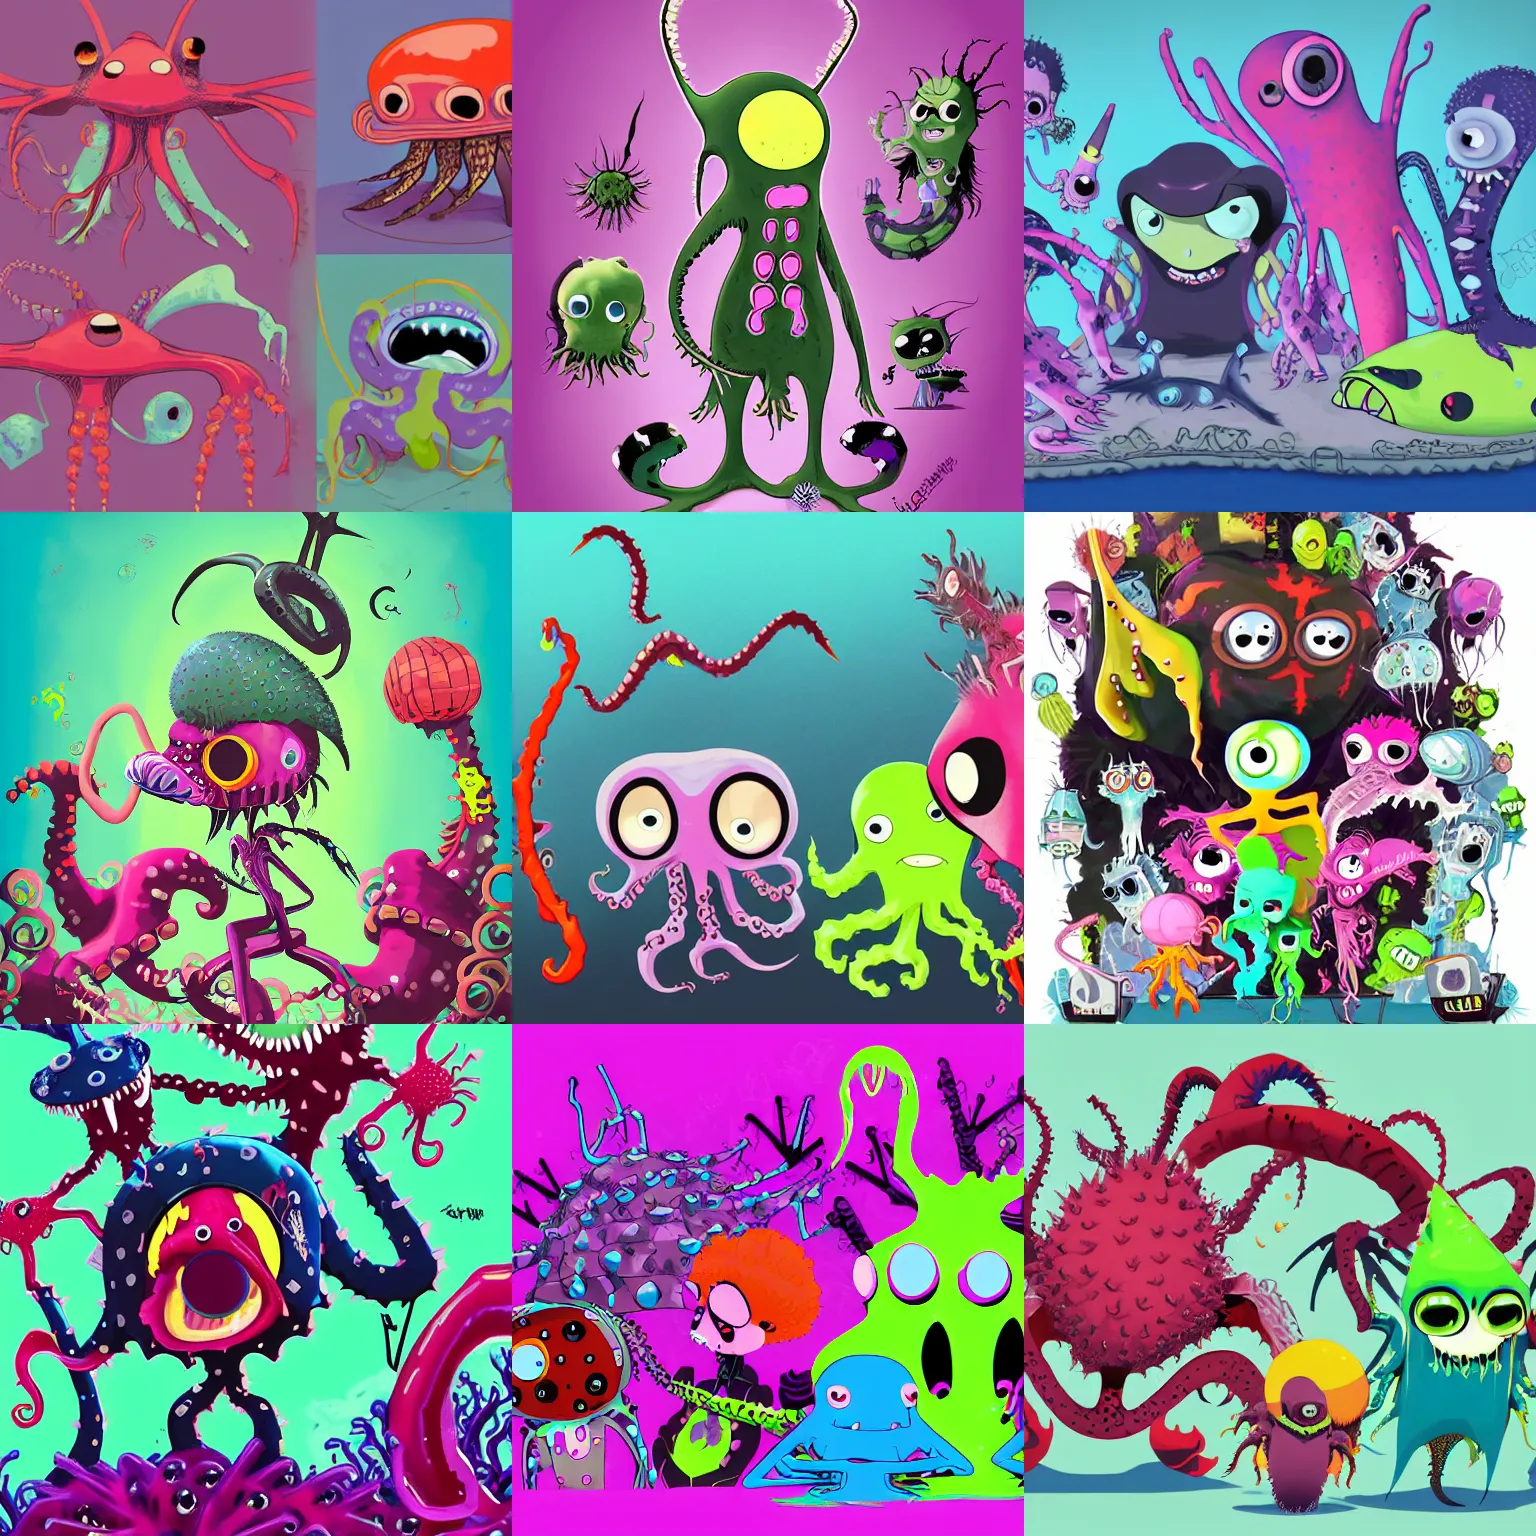 Prompt: punk rock vampiric electrifying 80s party rockstar vampire octopus, angler fish, gulper eel, mantis shrimp, jellyfish and sea urchins conceptual character designs of various shapes and sizes by genndy tartakovsky and splatoon by nintendo and the psychonauts franchise by doublefine tim shafer artists for the new hotel transylvania film